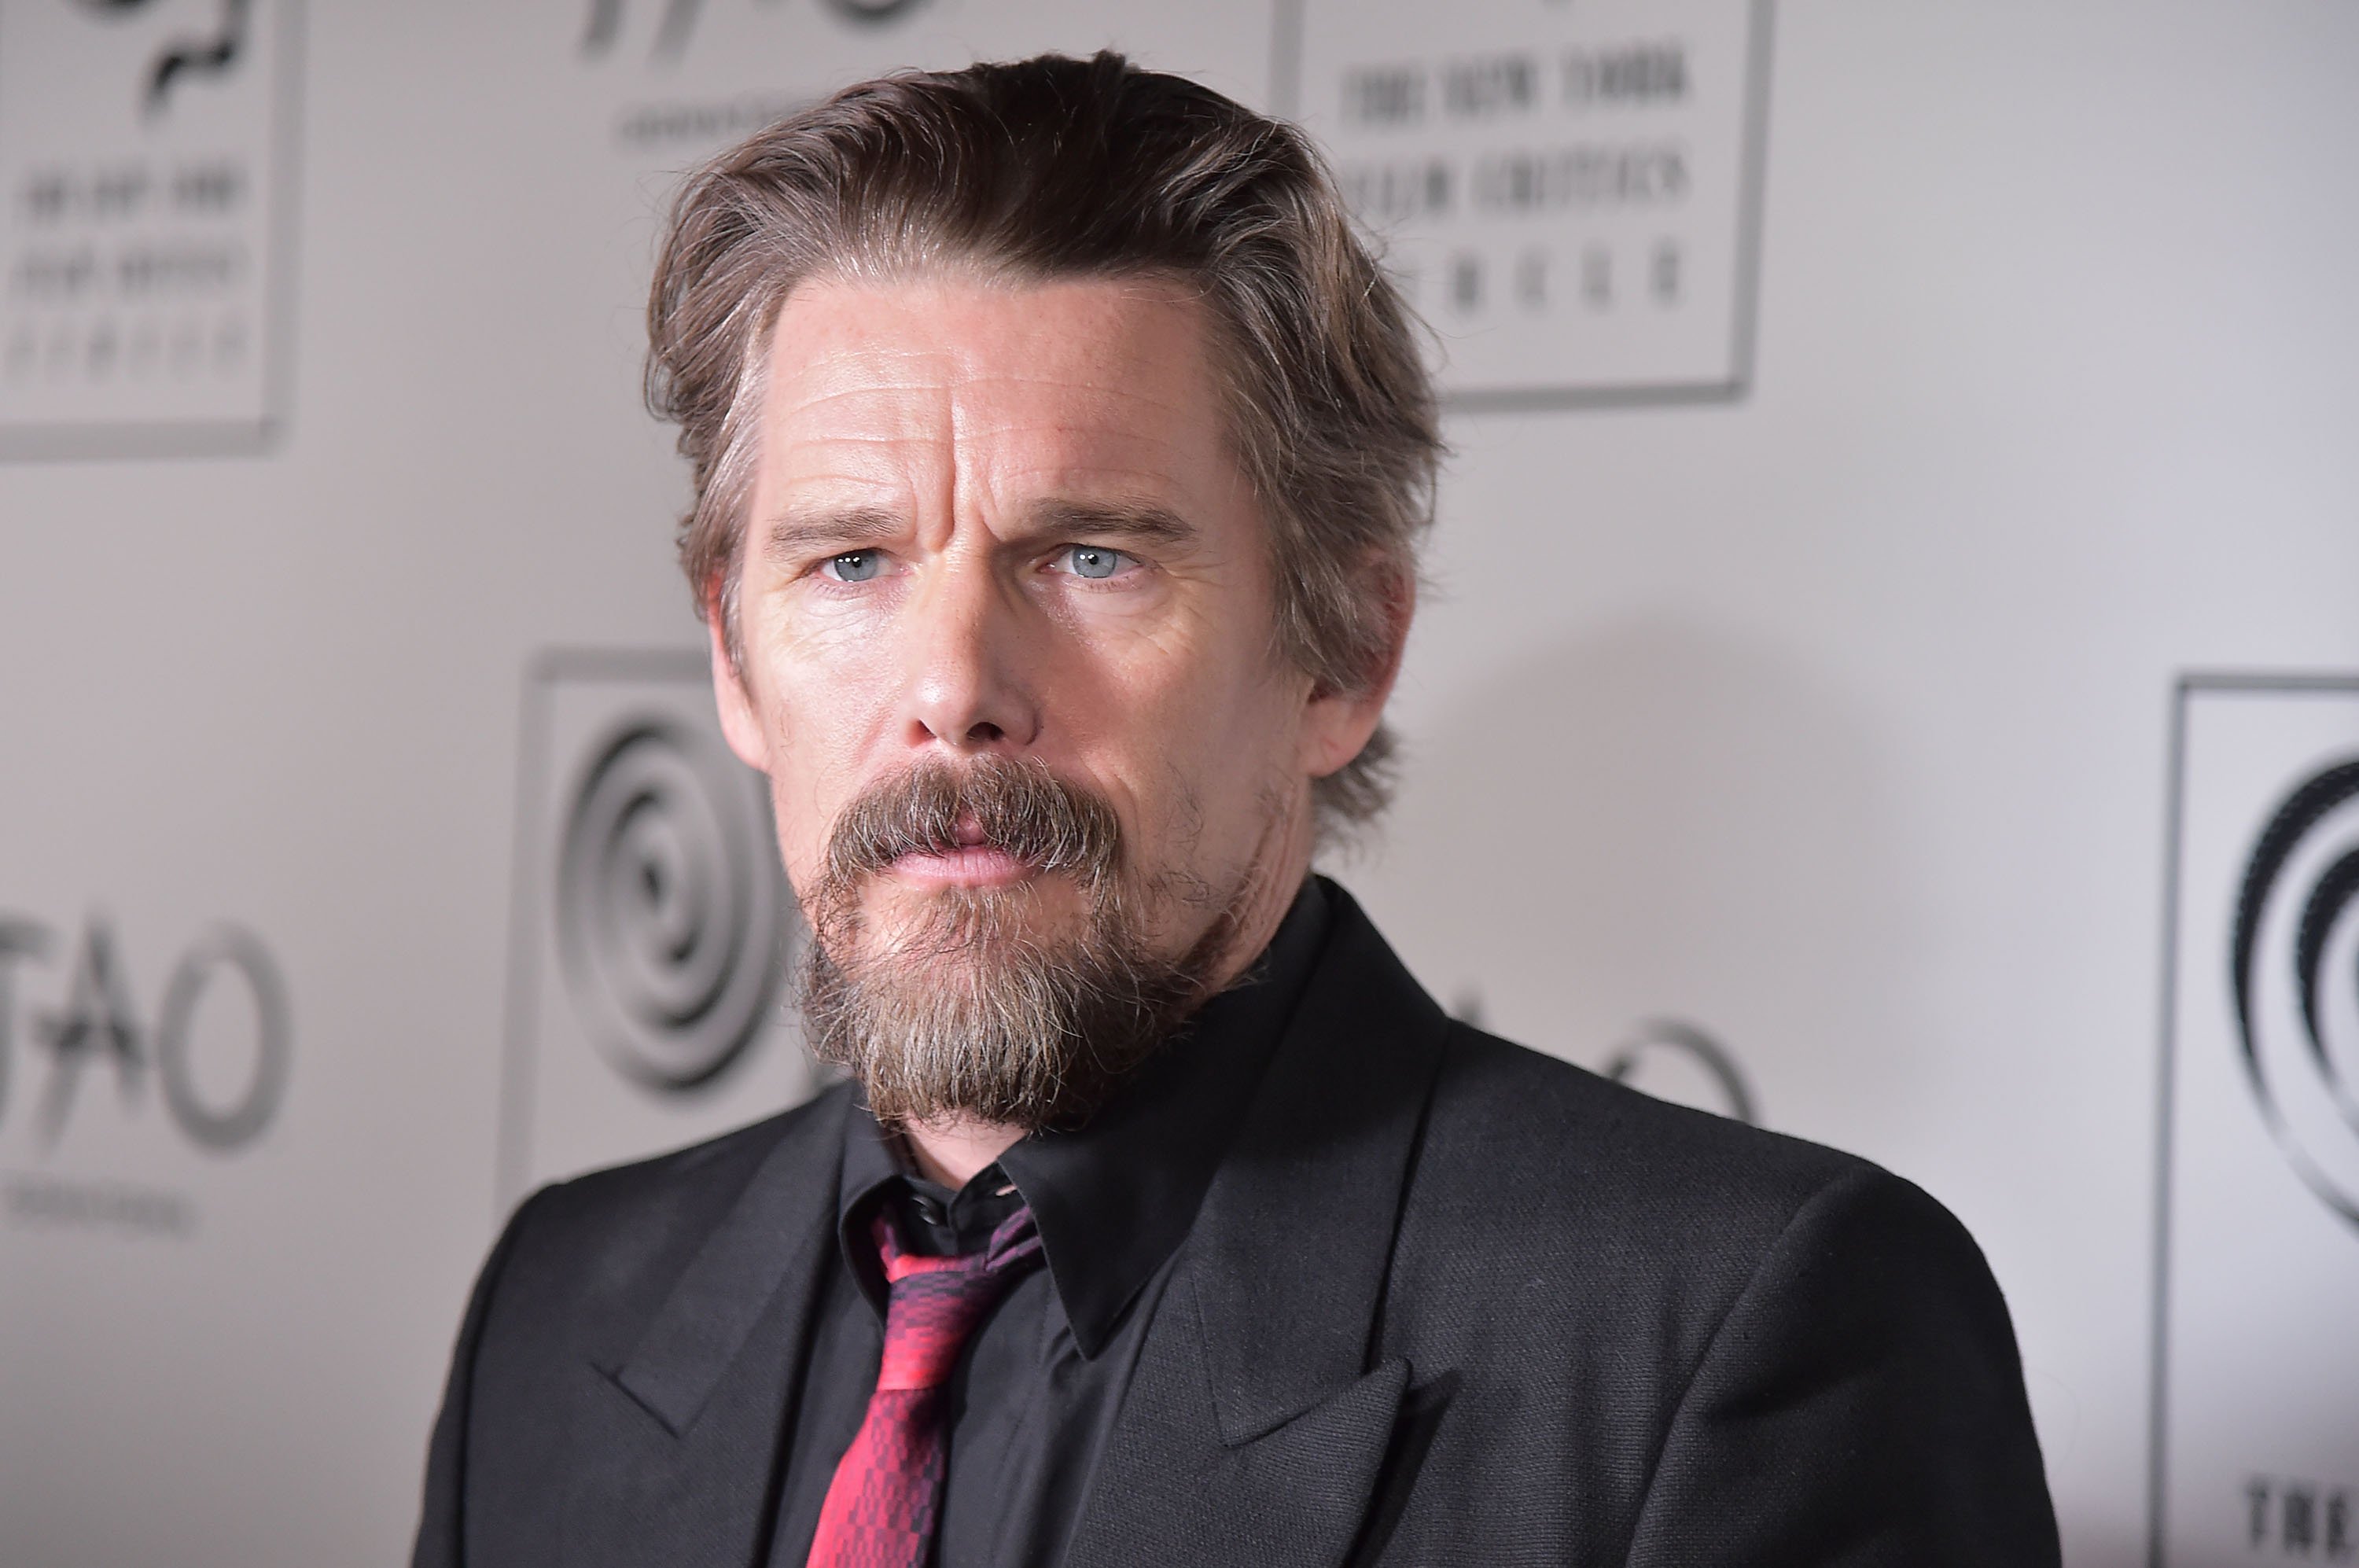 Ethan Hawke, who plays Arthur Harrow in 'Moon Knight,' wears a black suit over a black button-up shirt and red tie.